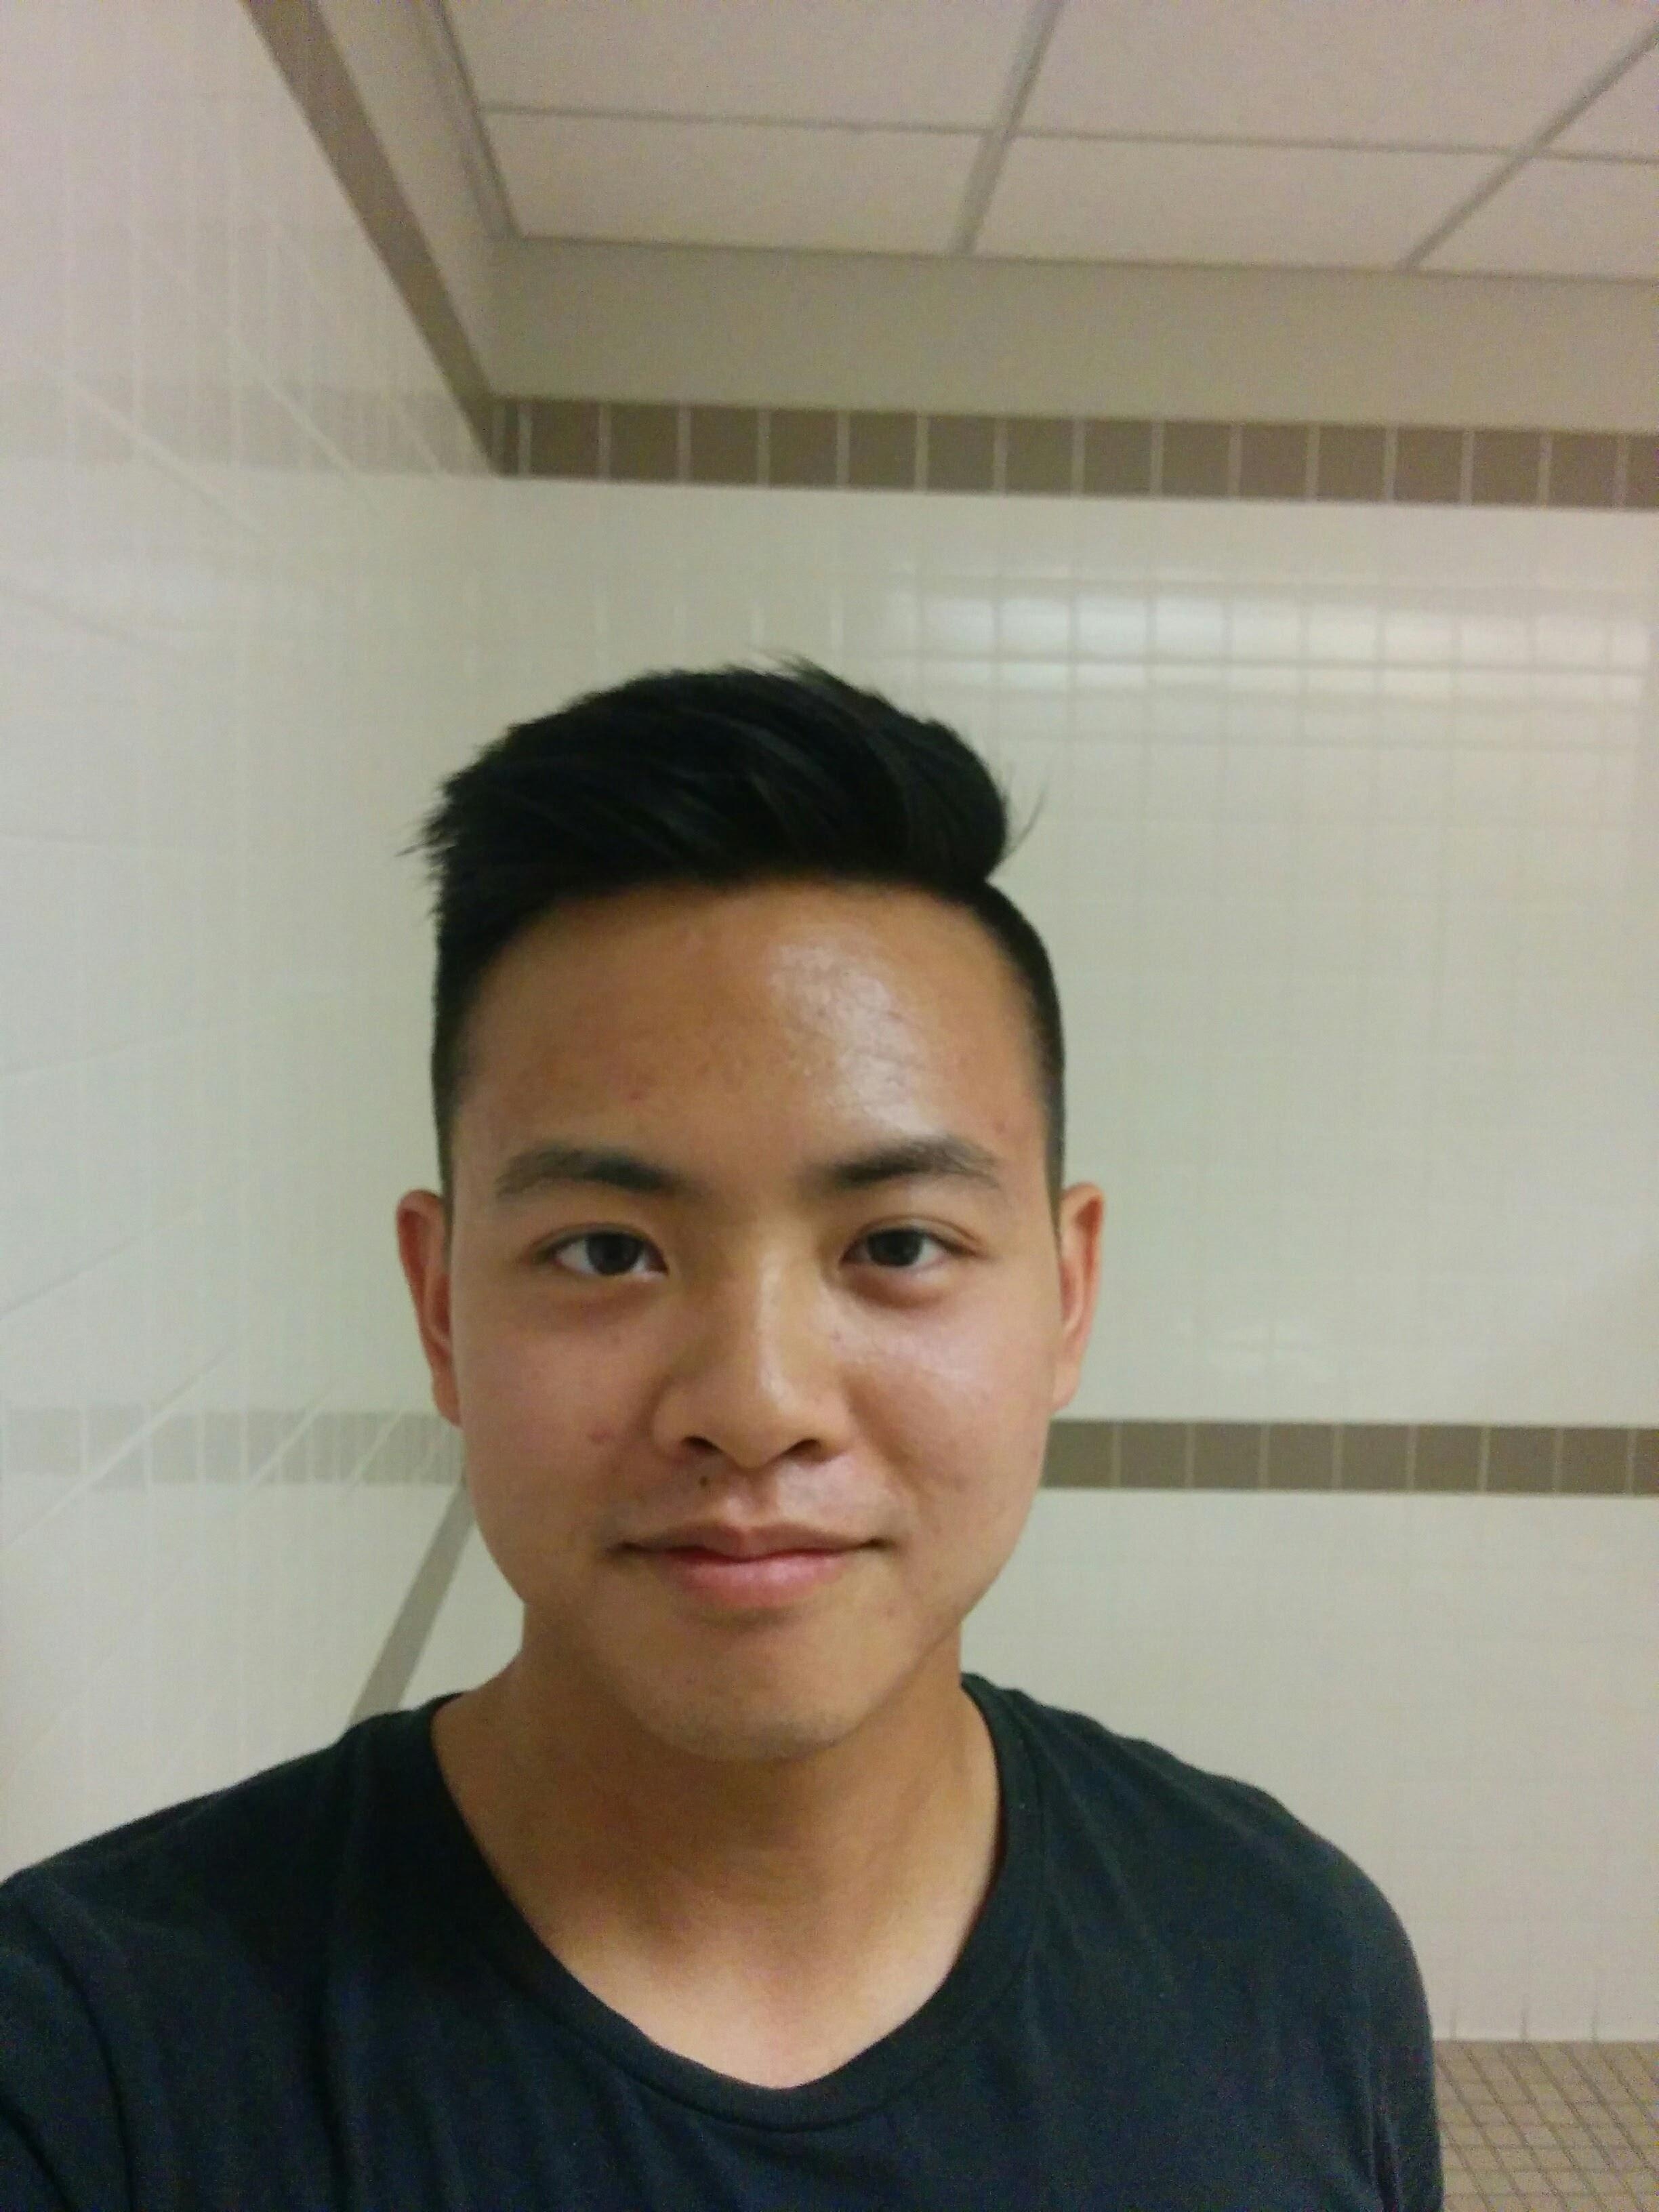 Barber Cut Way Too Close To The Part. I Look Like Asian Macklemore in Best Asian Male Hairstyles Reddit